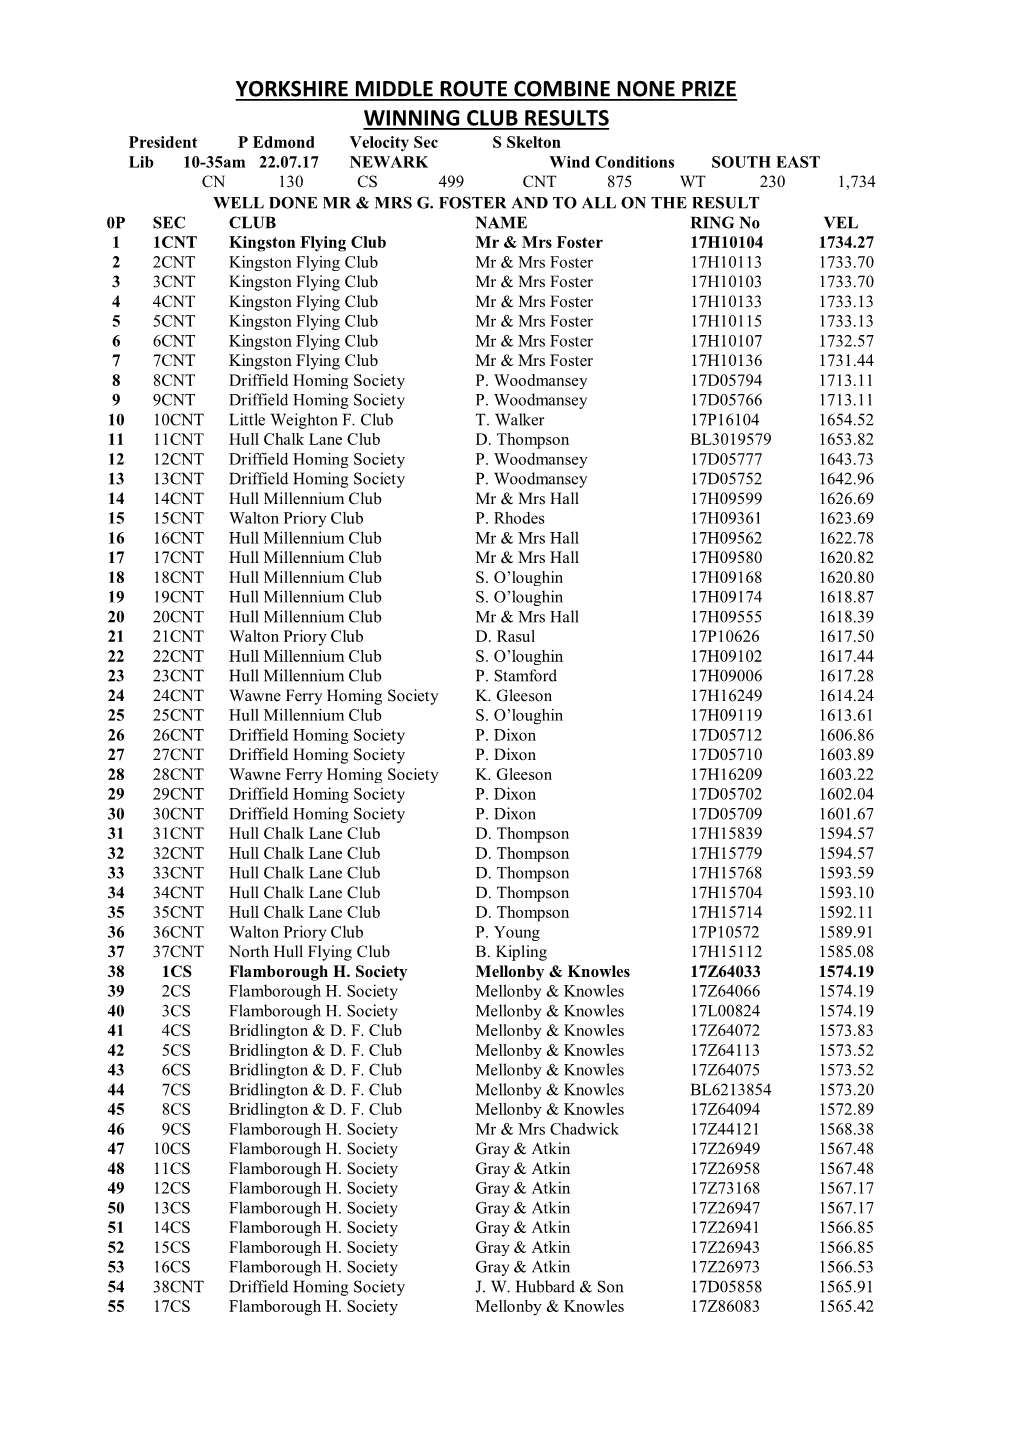 Yorkshire Middle Route Federation Race Result